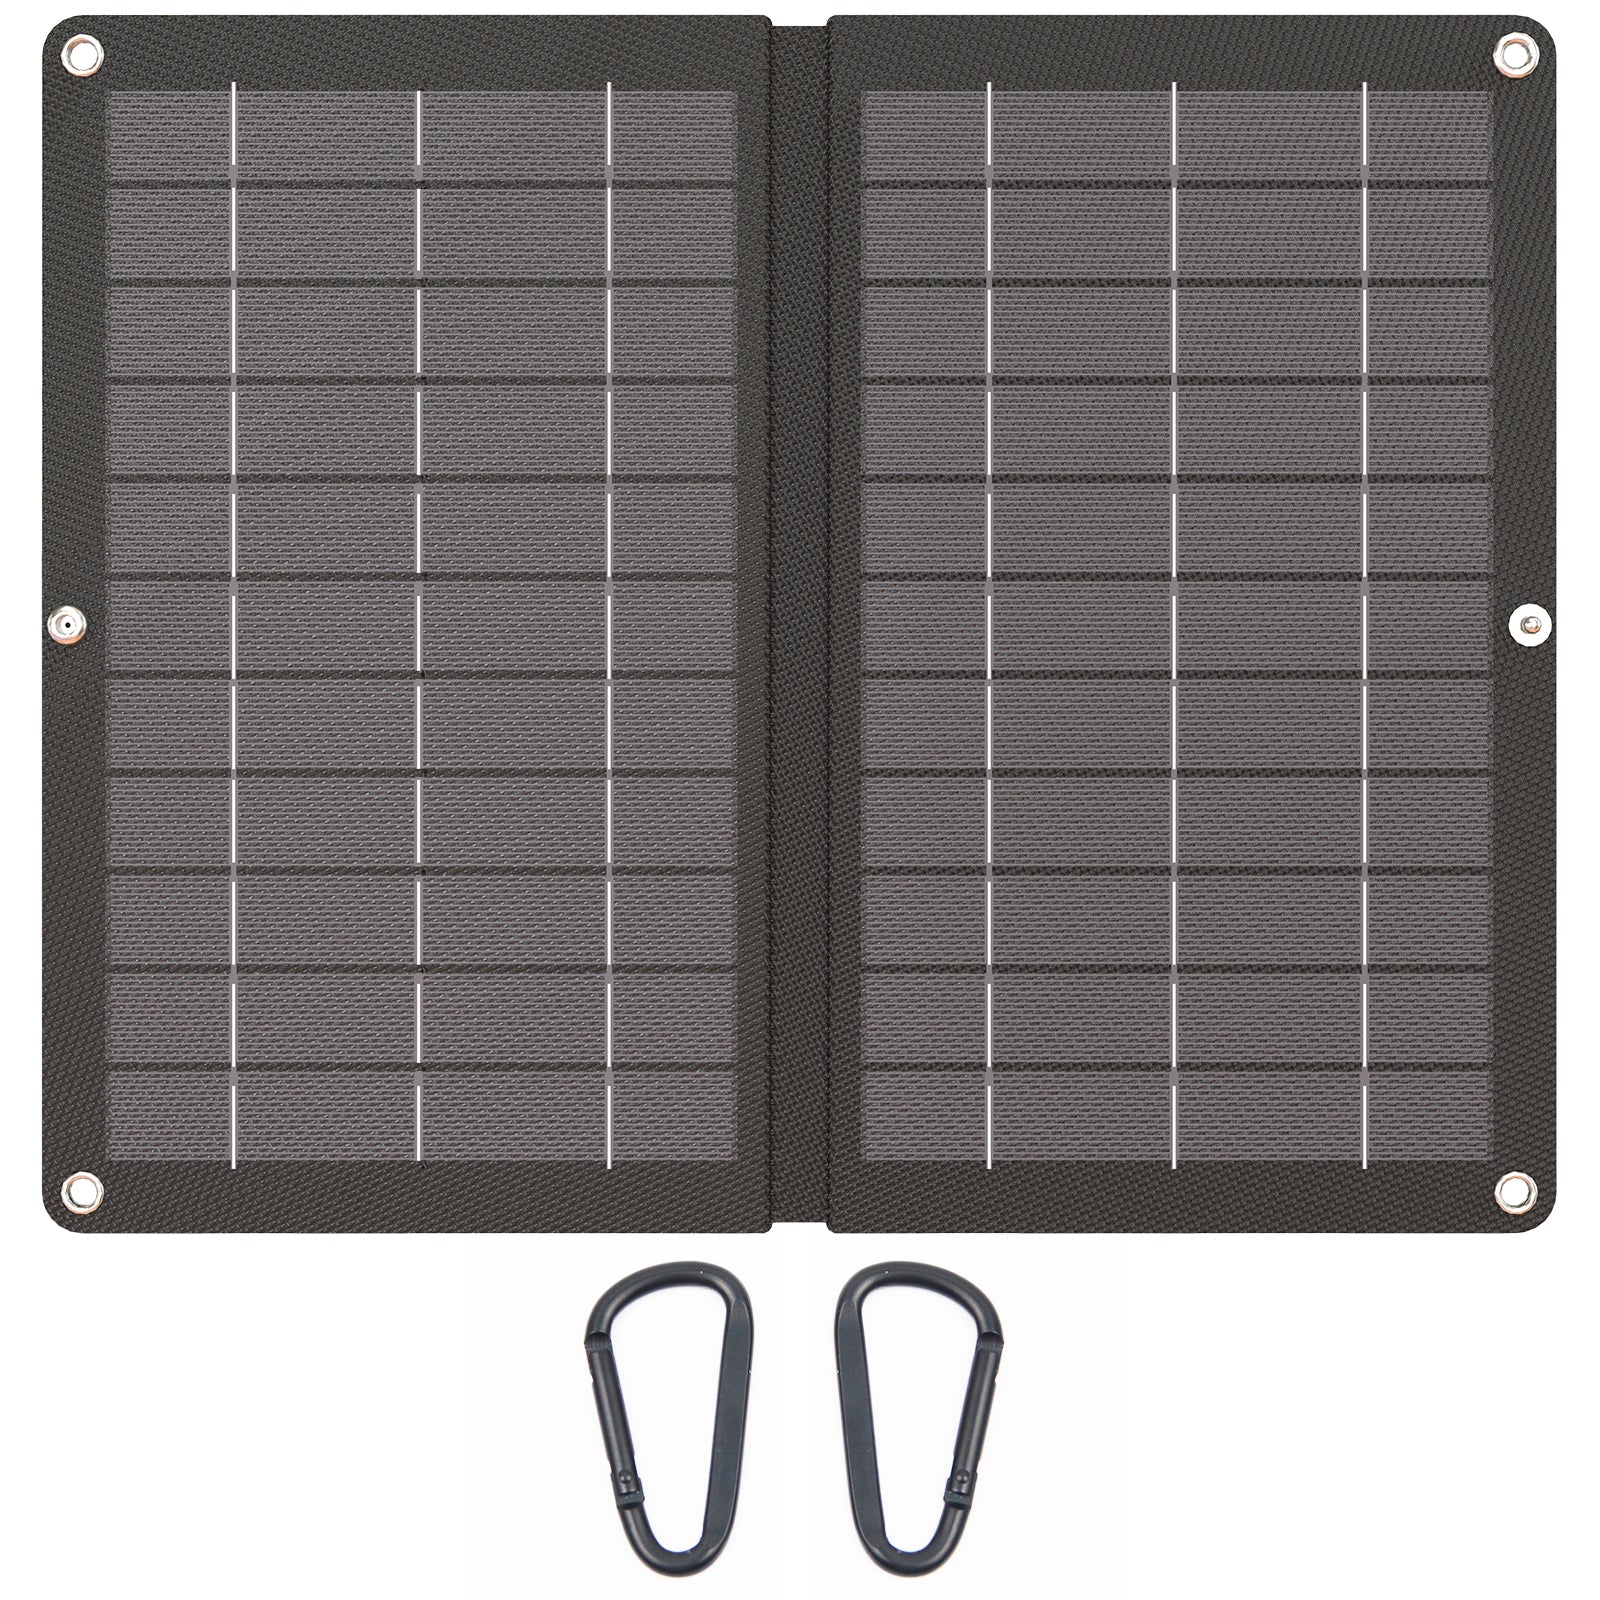 LMENGER 15W Portable Solar Panel, Foldable Solar Charger, IP65 Waterproof, Compatible with iPhone, iPad, Samsung Galaxy for Outdoor Activities